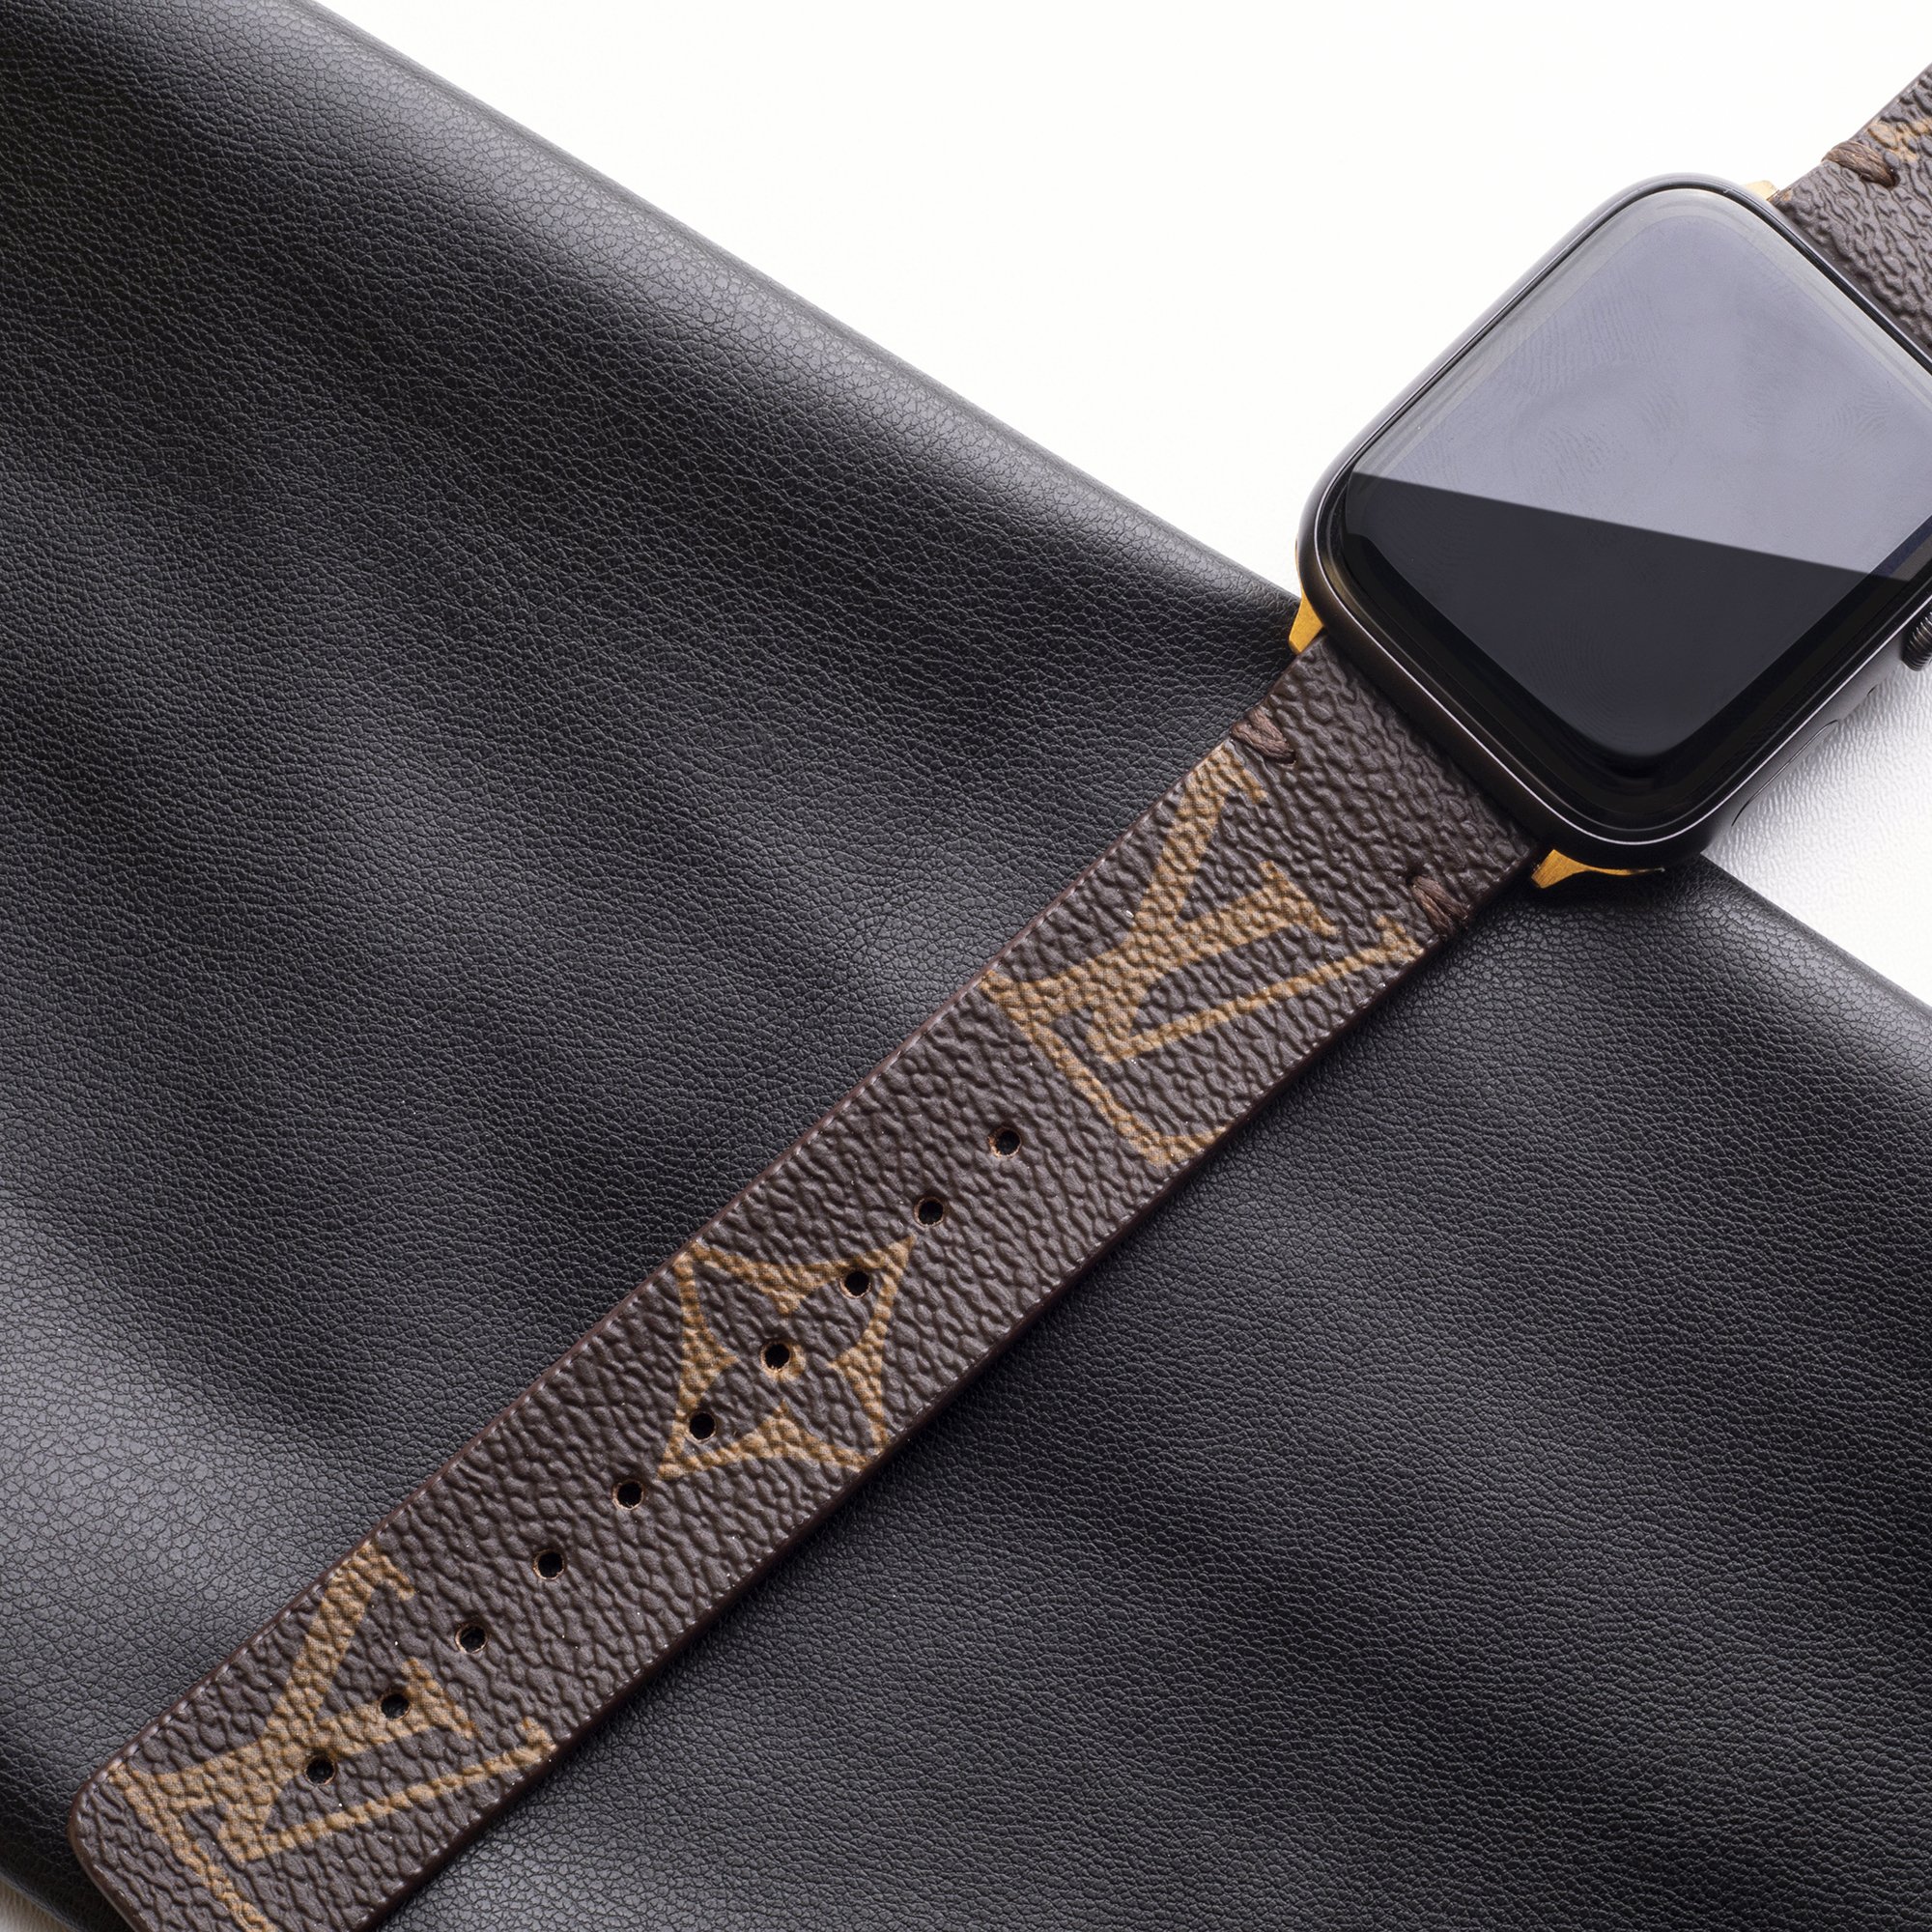 lv apple watch band for Sale,Up To OFF 70%